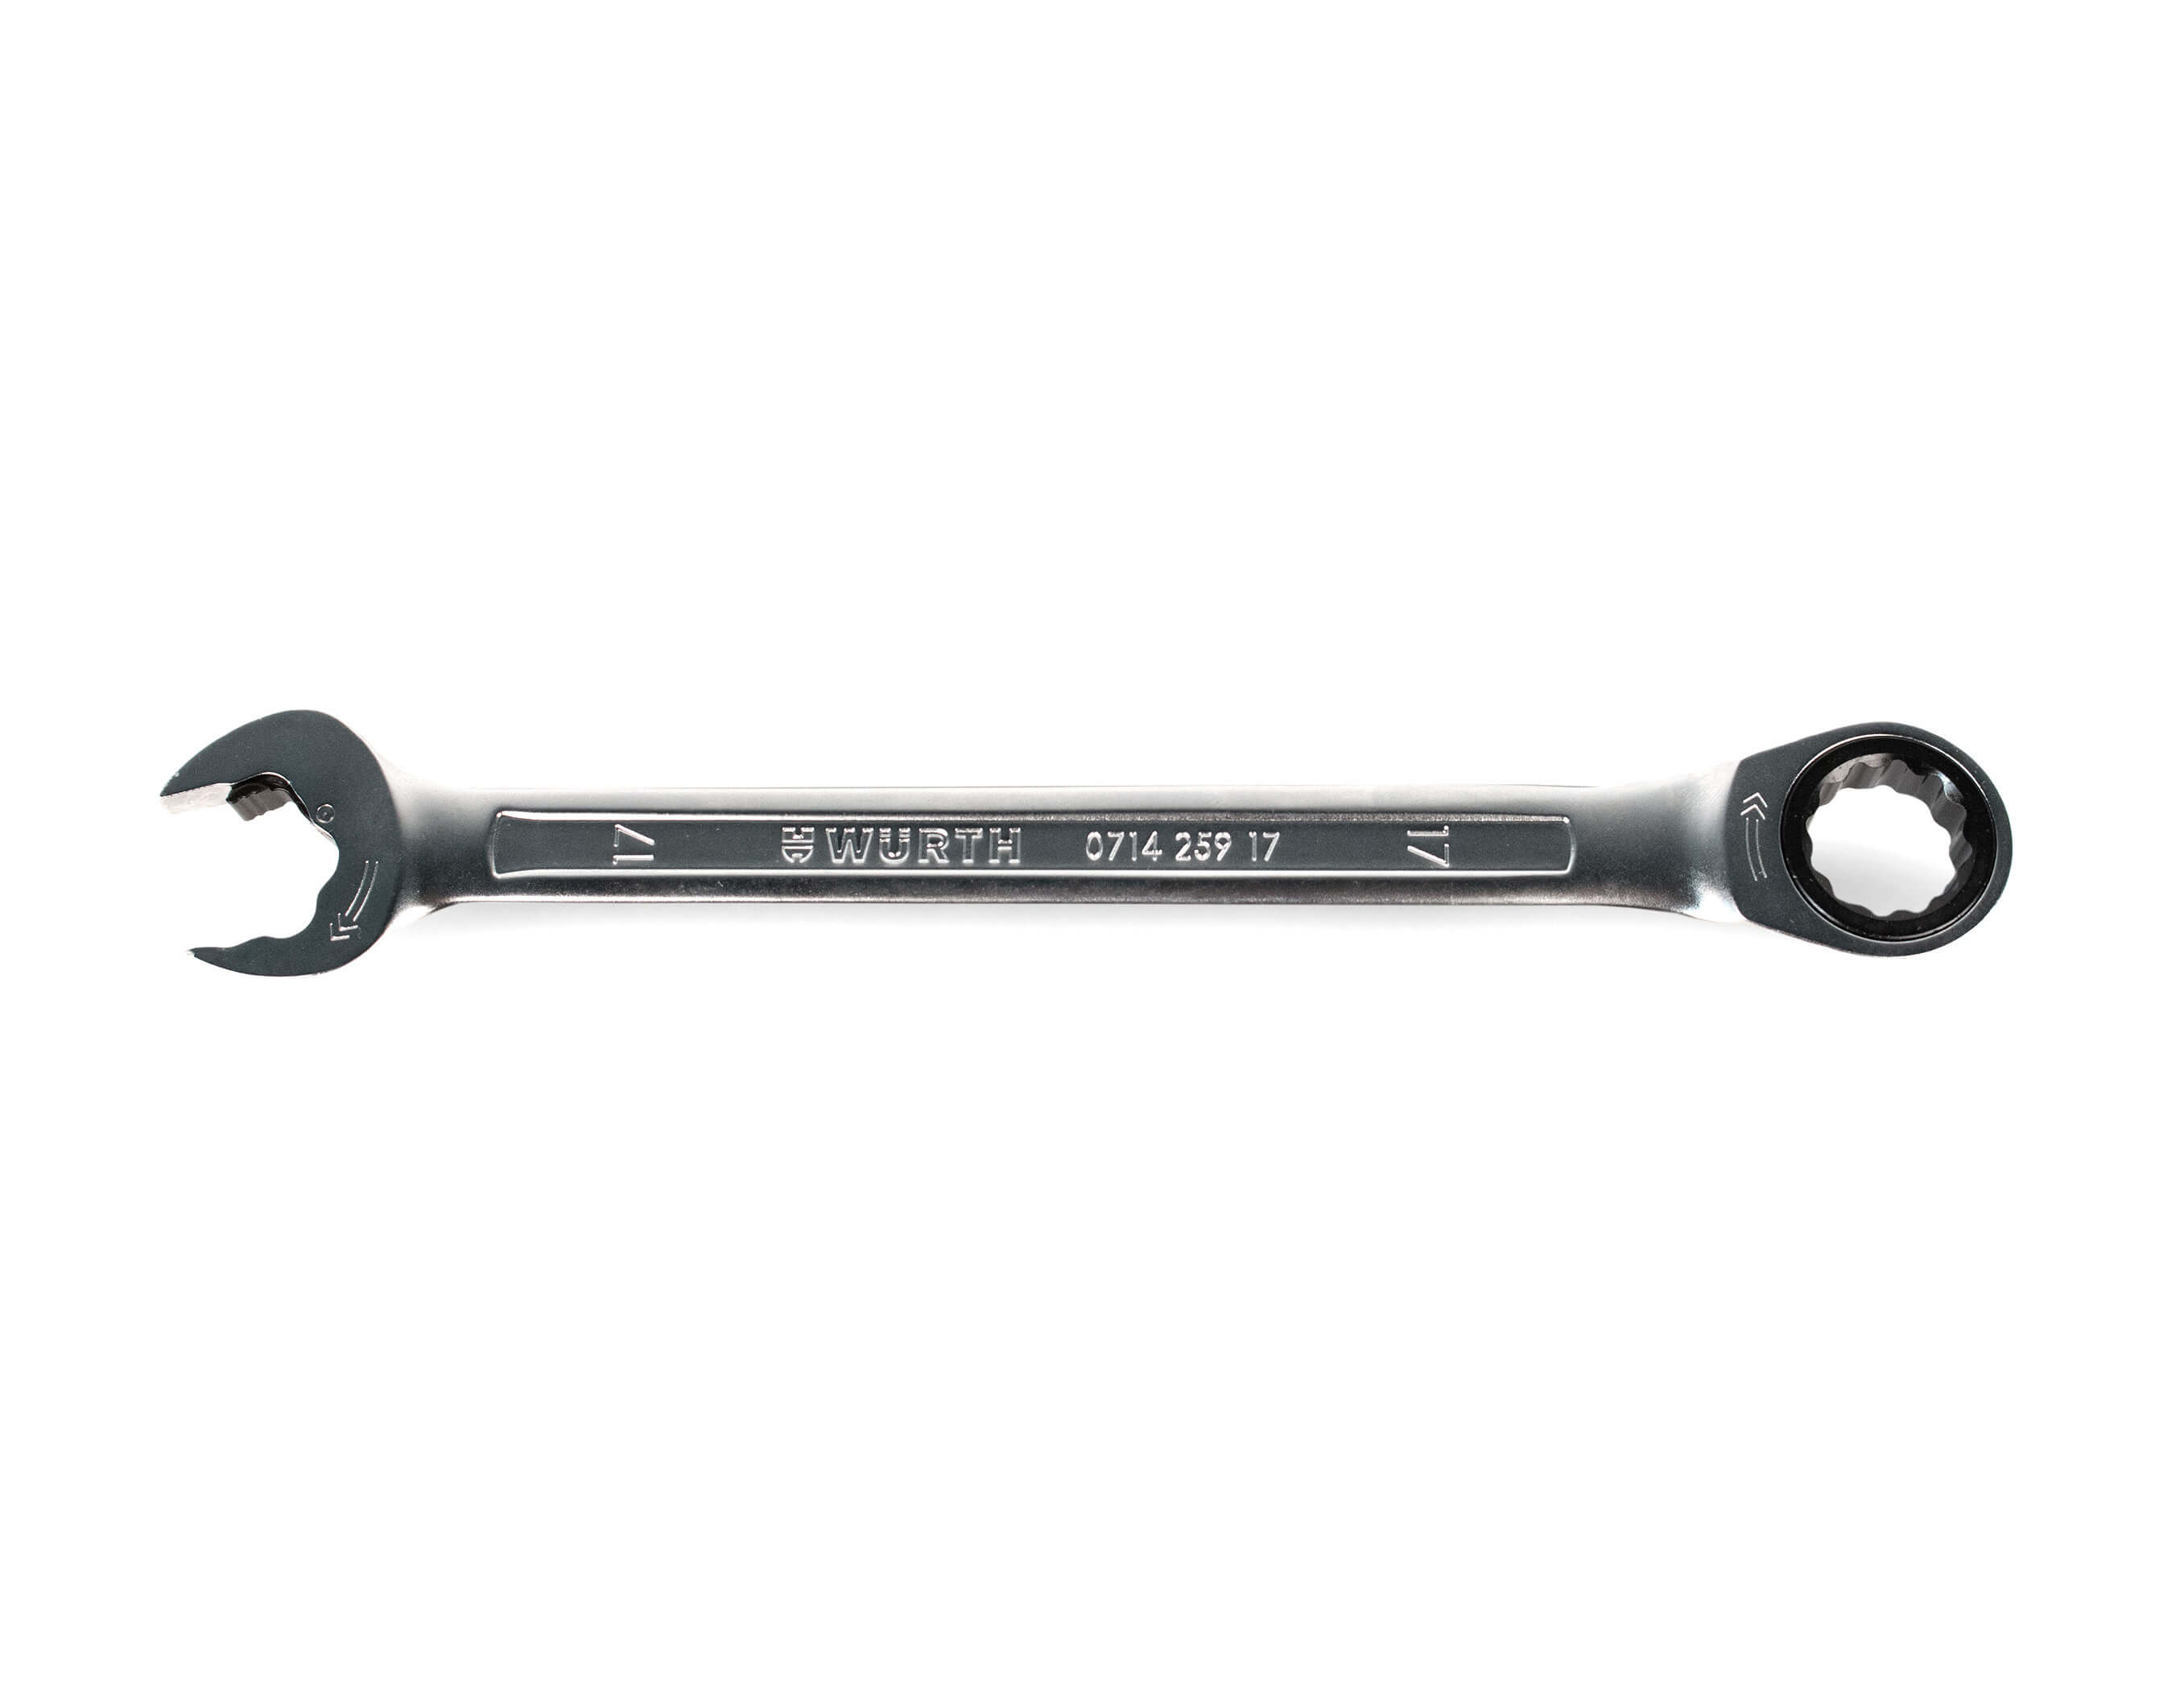 Ratchet combination wrench both sides 17MM